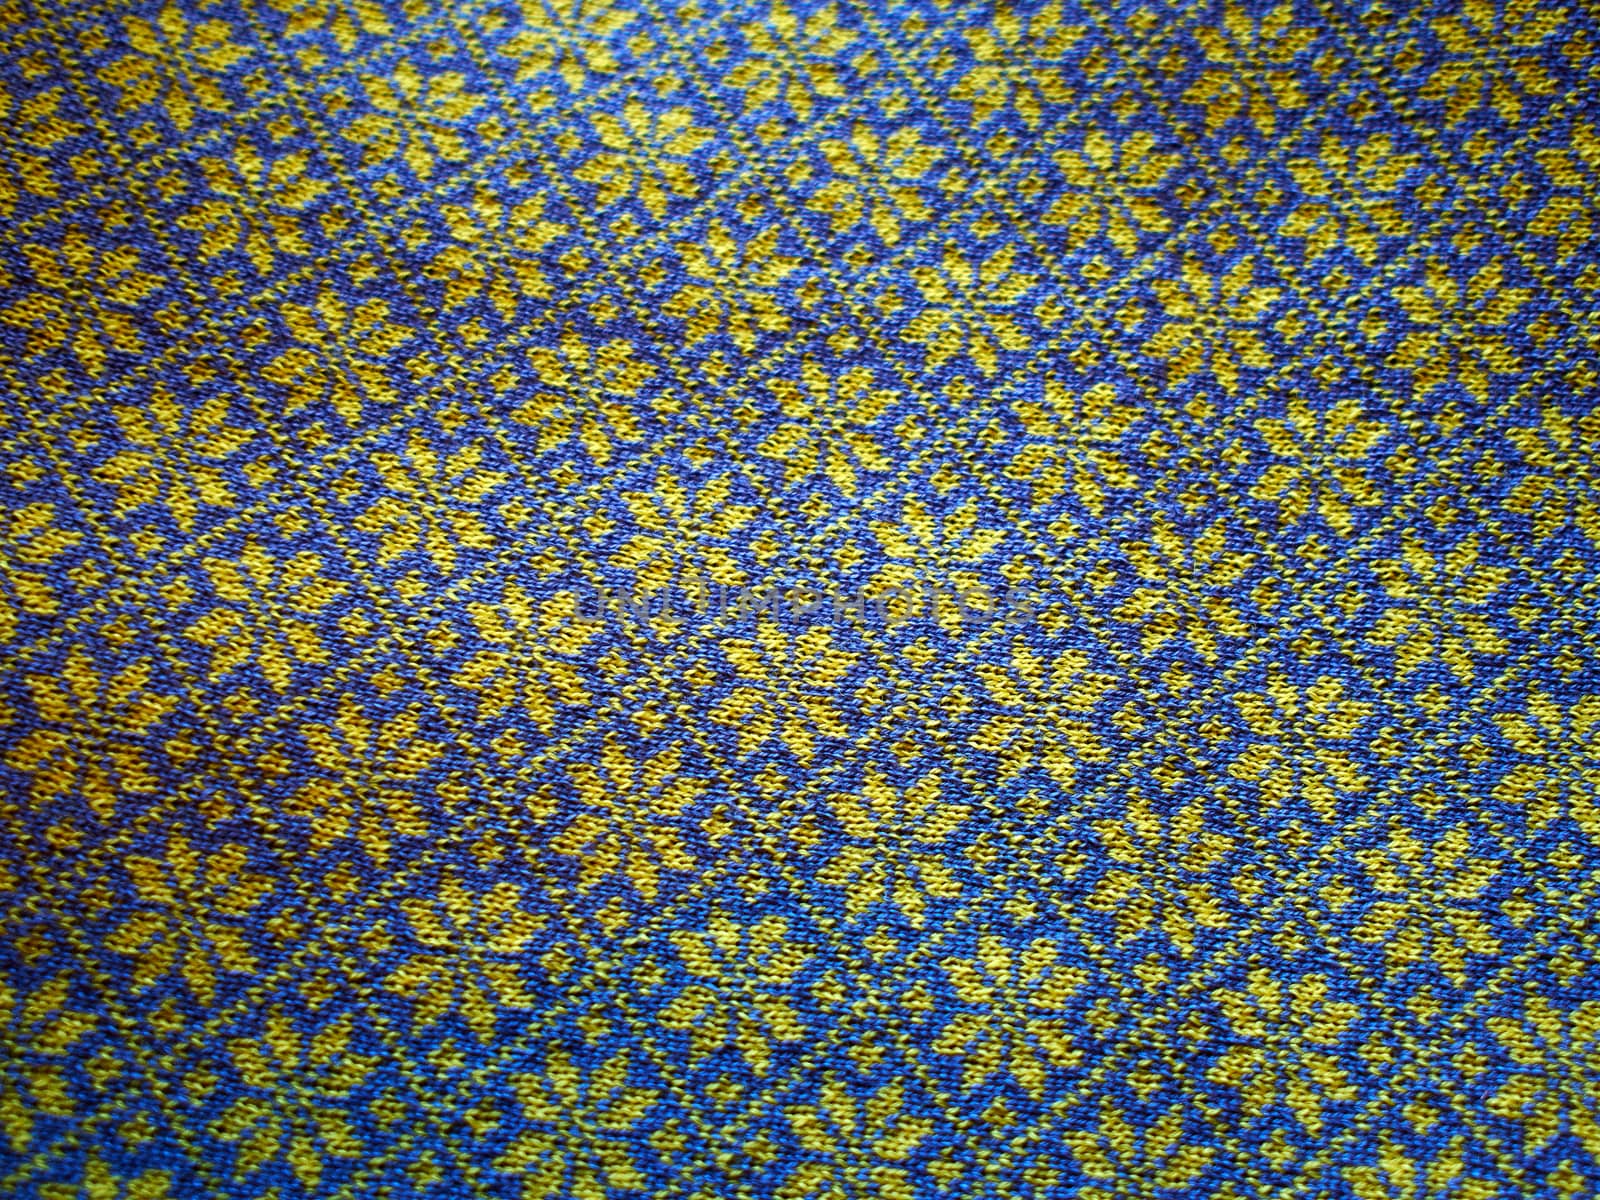 Closeup of a handmade wool sweater with Icelandic traditional typical pattern in blue and yellow colors